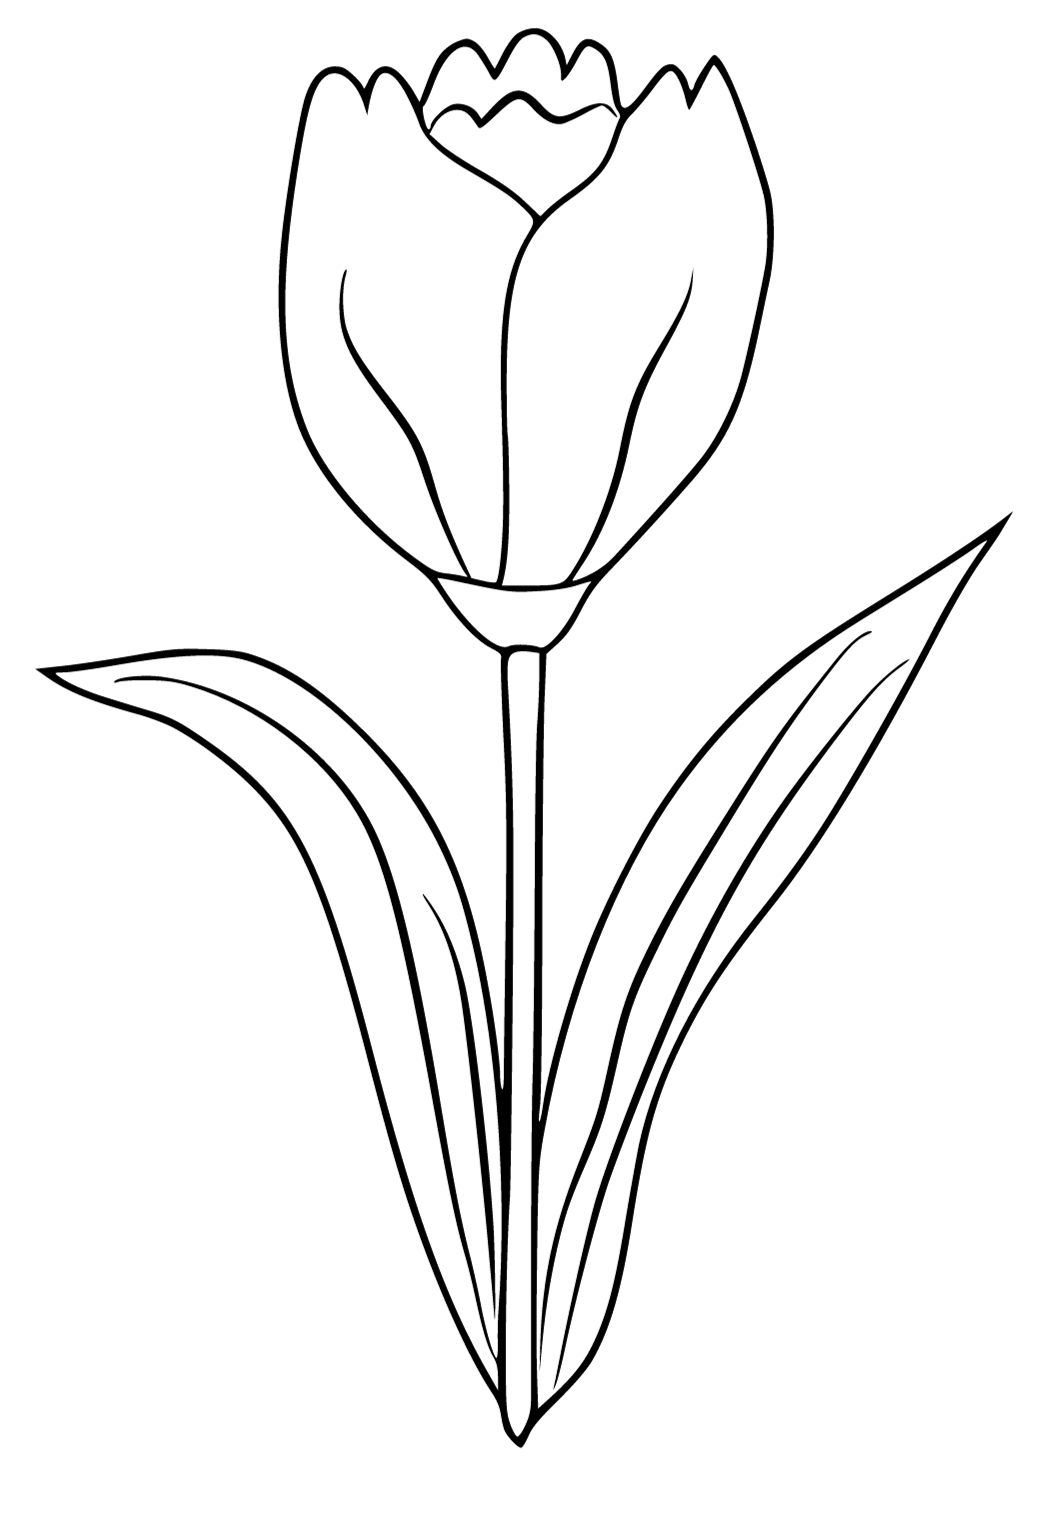 Free printable tulip easy coloring page for adults and kids